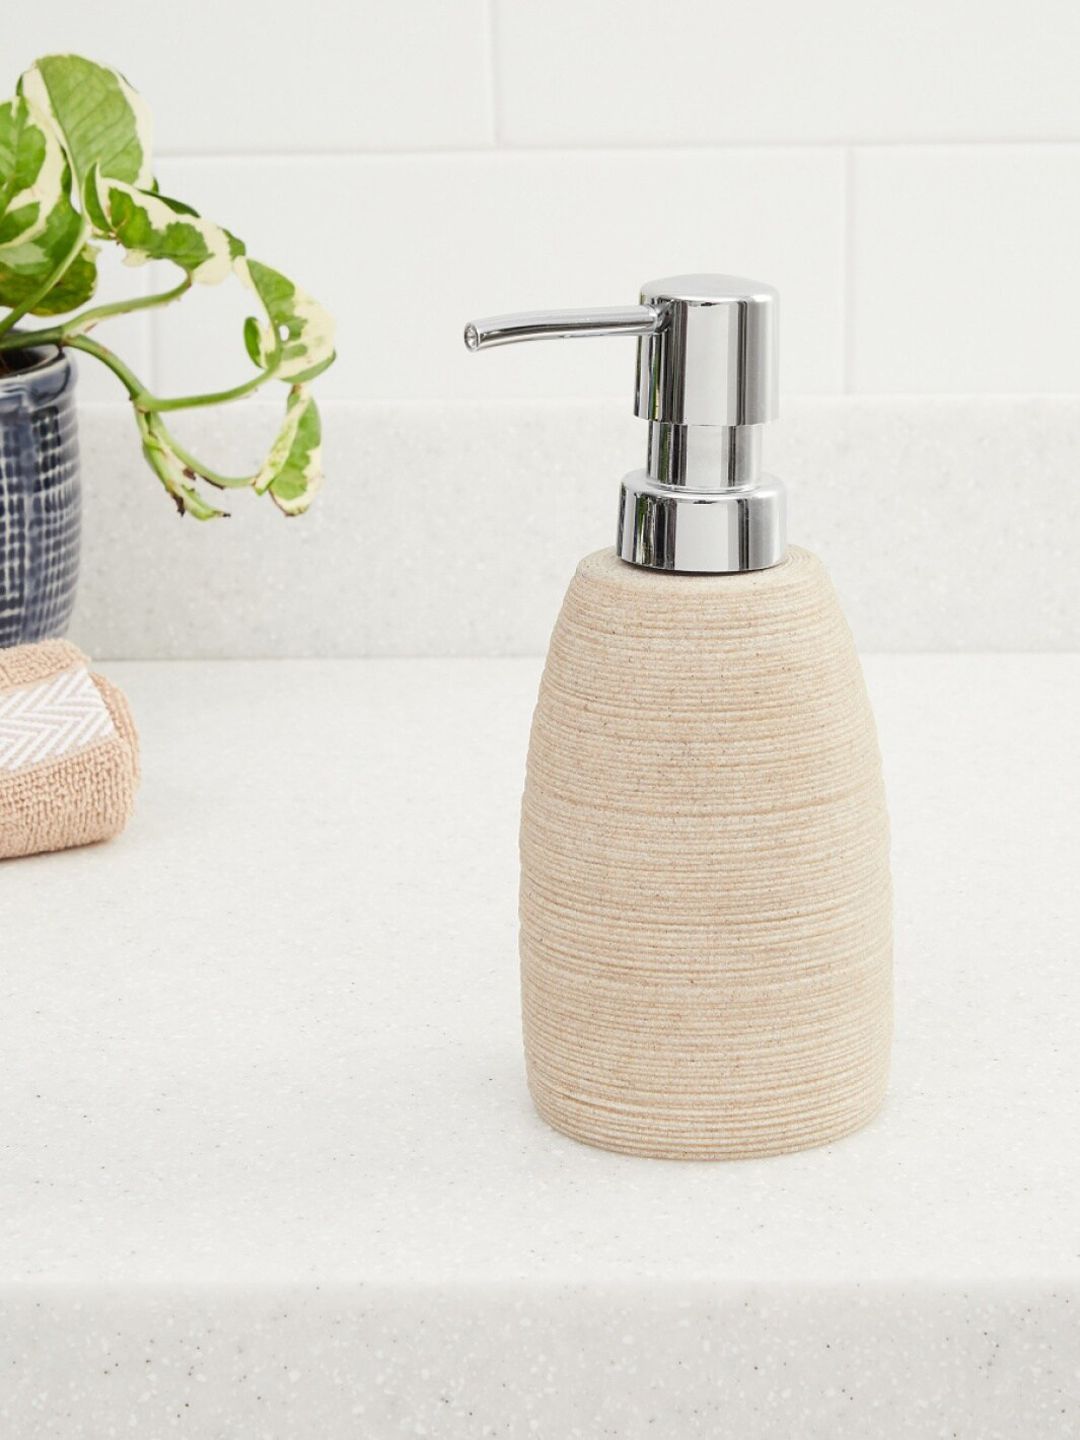 Home Centre Beige & Silver-Toned Marshmallow Textured Soap Dispenser Price in India